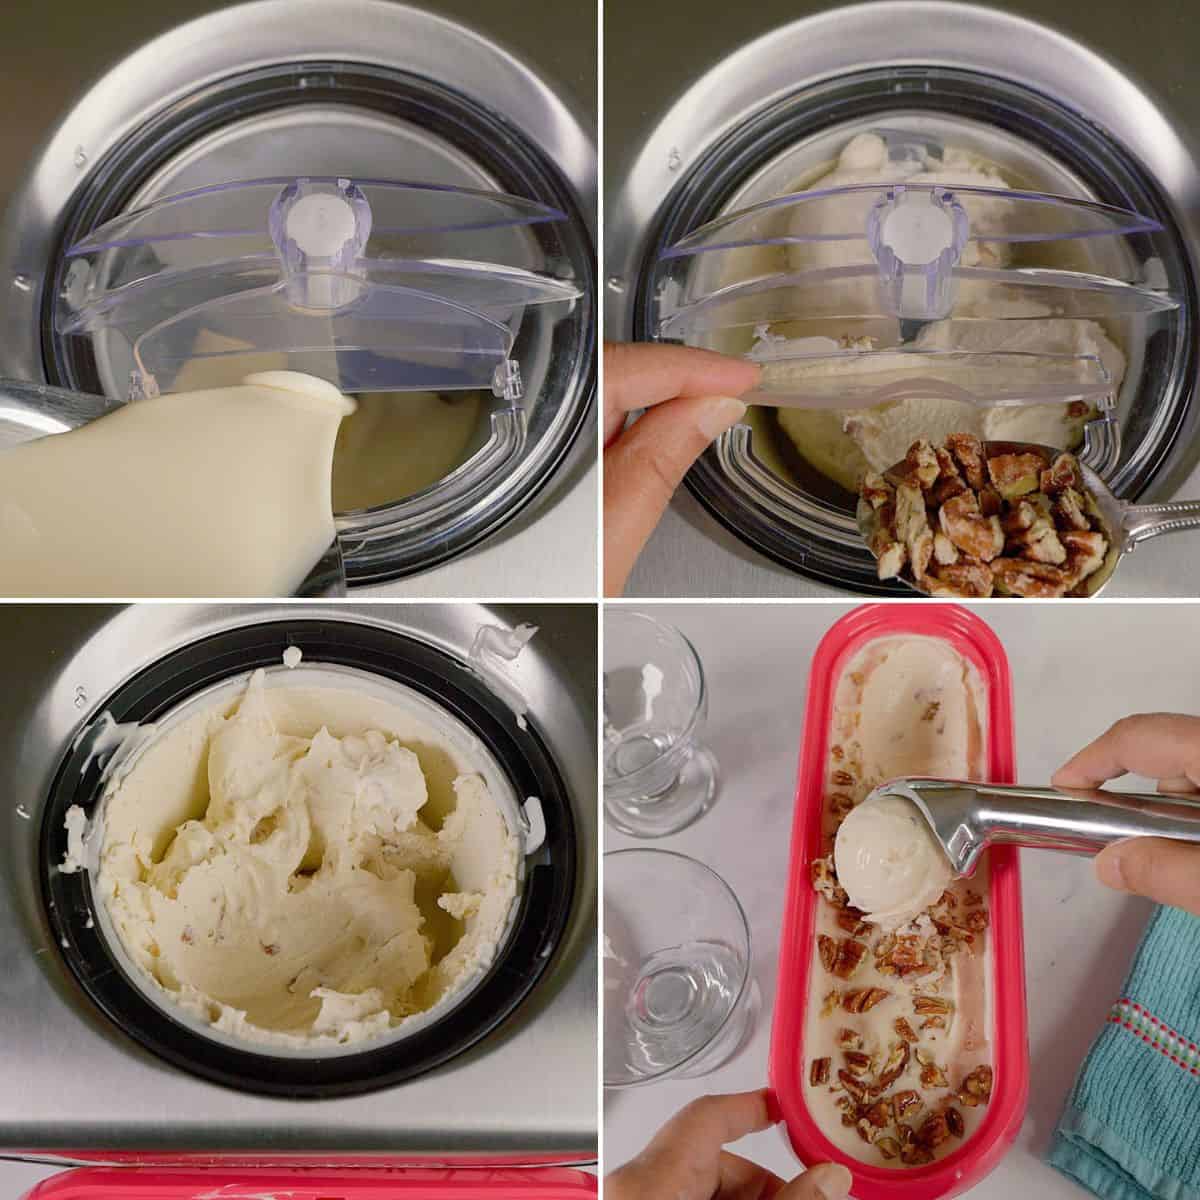 Making the ice cream and adding nuts.